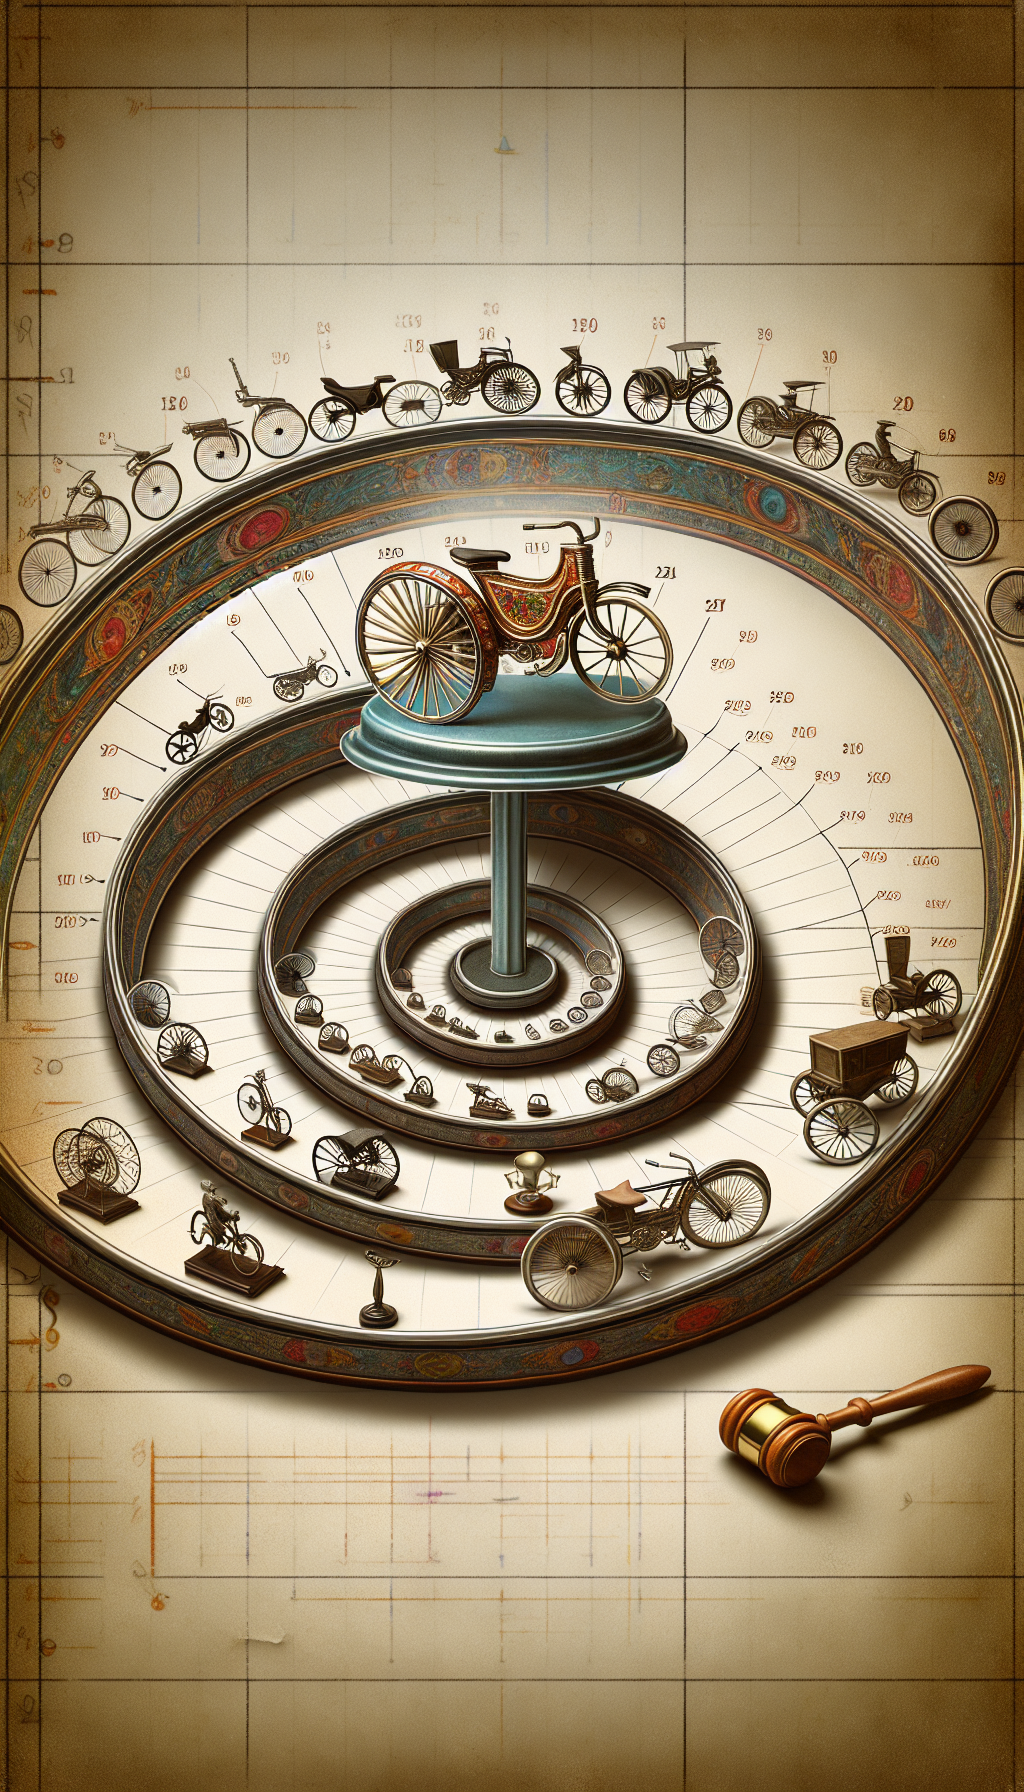 An illustration depicts a whimsical spiral timeline, with each loop cradling a different-era antique tricycle that progressively increases in detail and value, culminating with a gleaming, ornate tricycle atop a pedestal at the center, encircled by appraisal tools like a magnifying glass and auction hammer, signifying its esteemed status and worth in the journey of tricycle history.